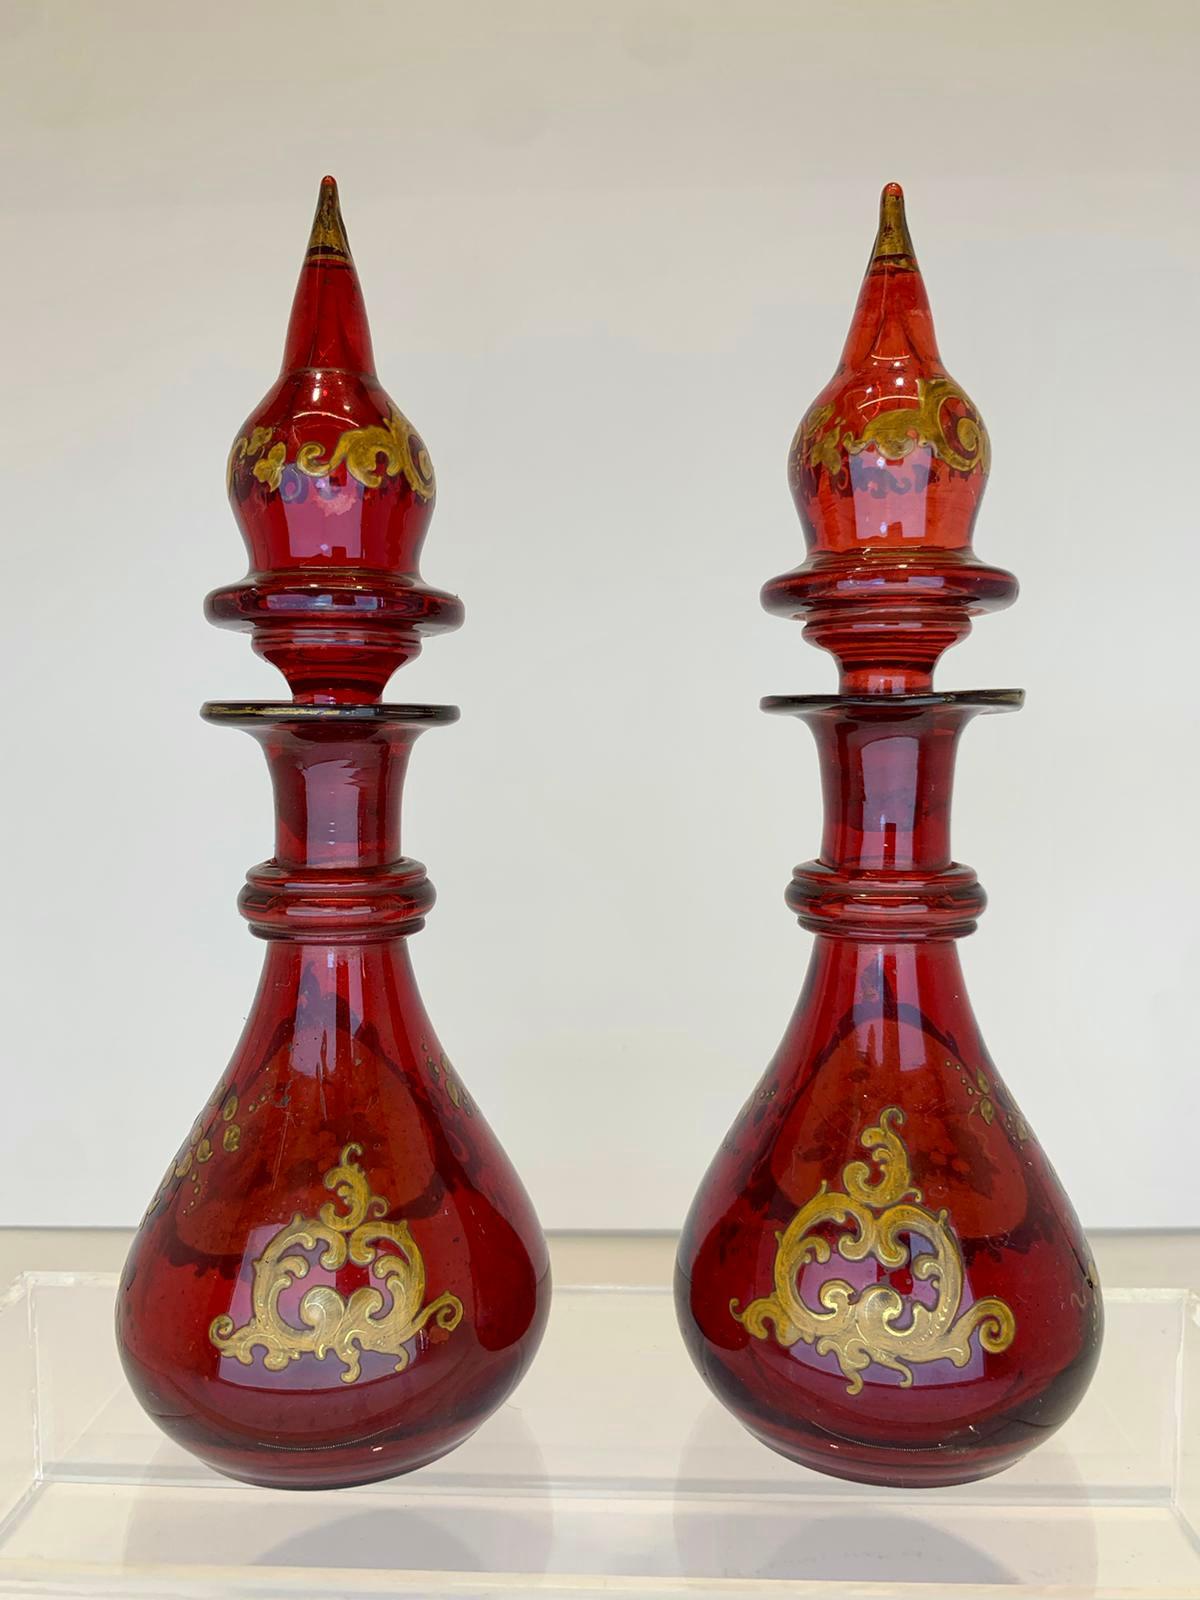 Pair Antique Bohemian Ruby Enameled Glass Perfume Bottles, Flacon, 19th Century In Good Condition For Sale In Rostock, MV